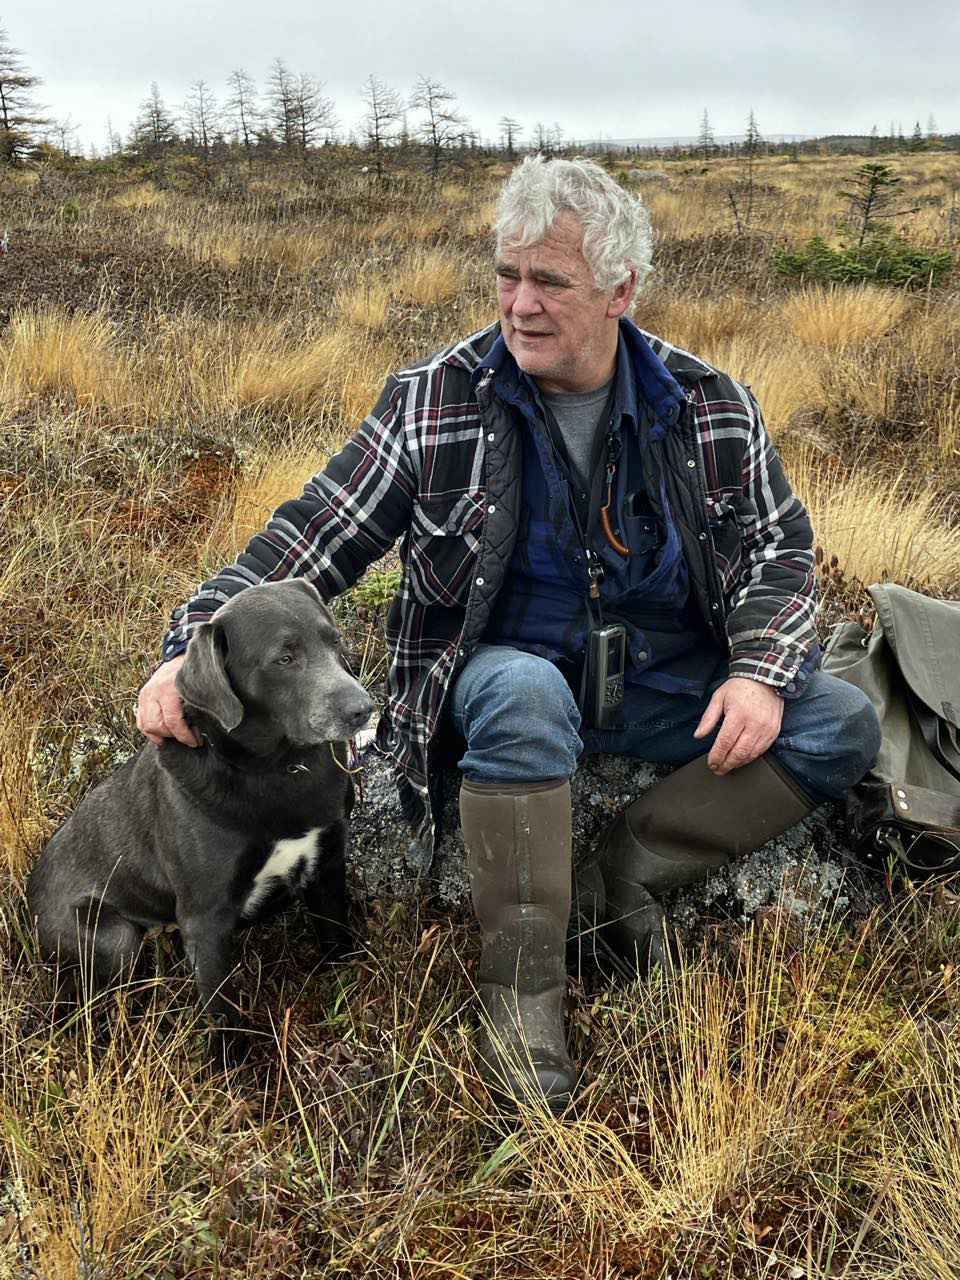 Lloyd Pike and his dog, Hank of Bonavista Bay. Lloyd used camera security to catch thieves on his property.